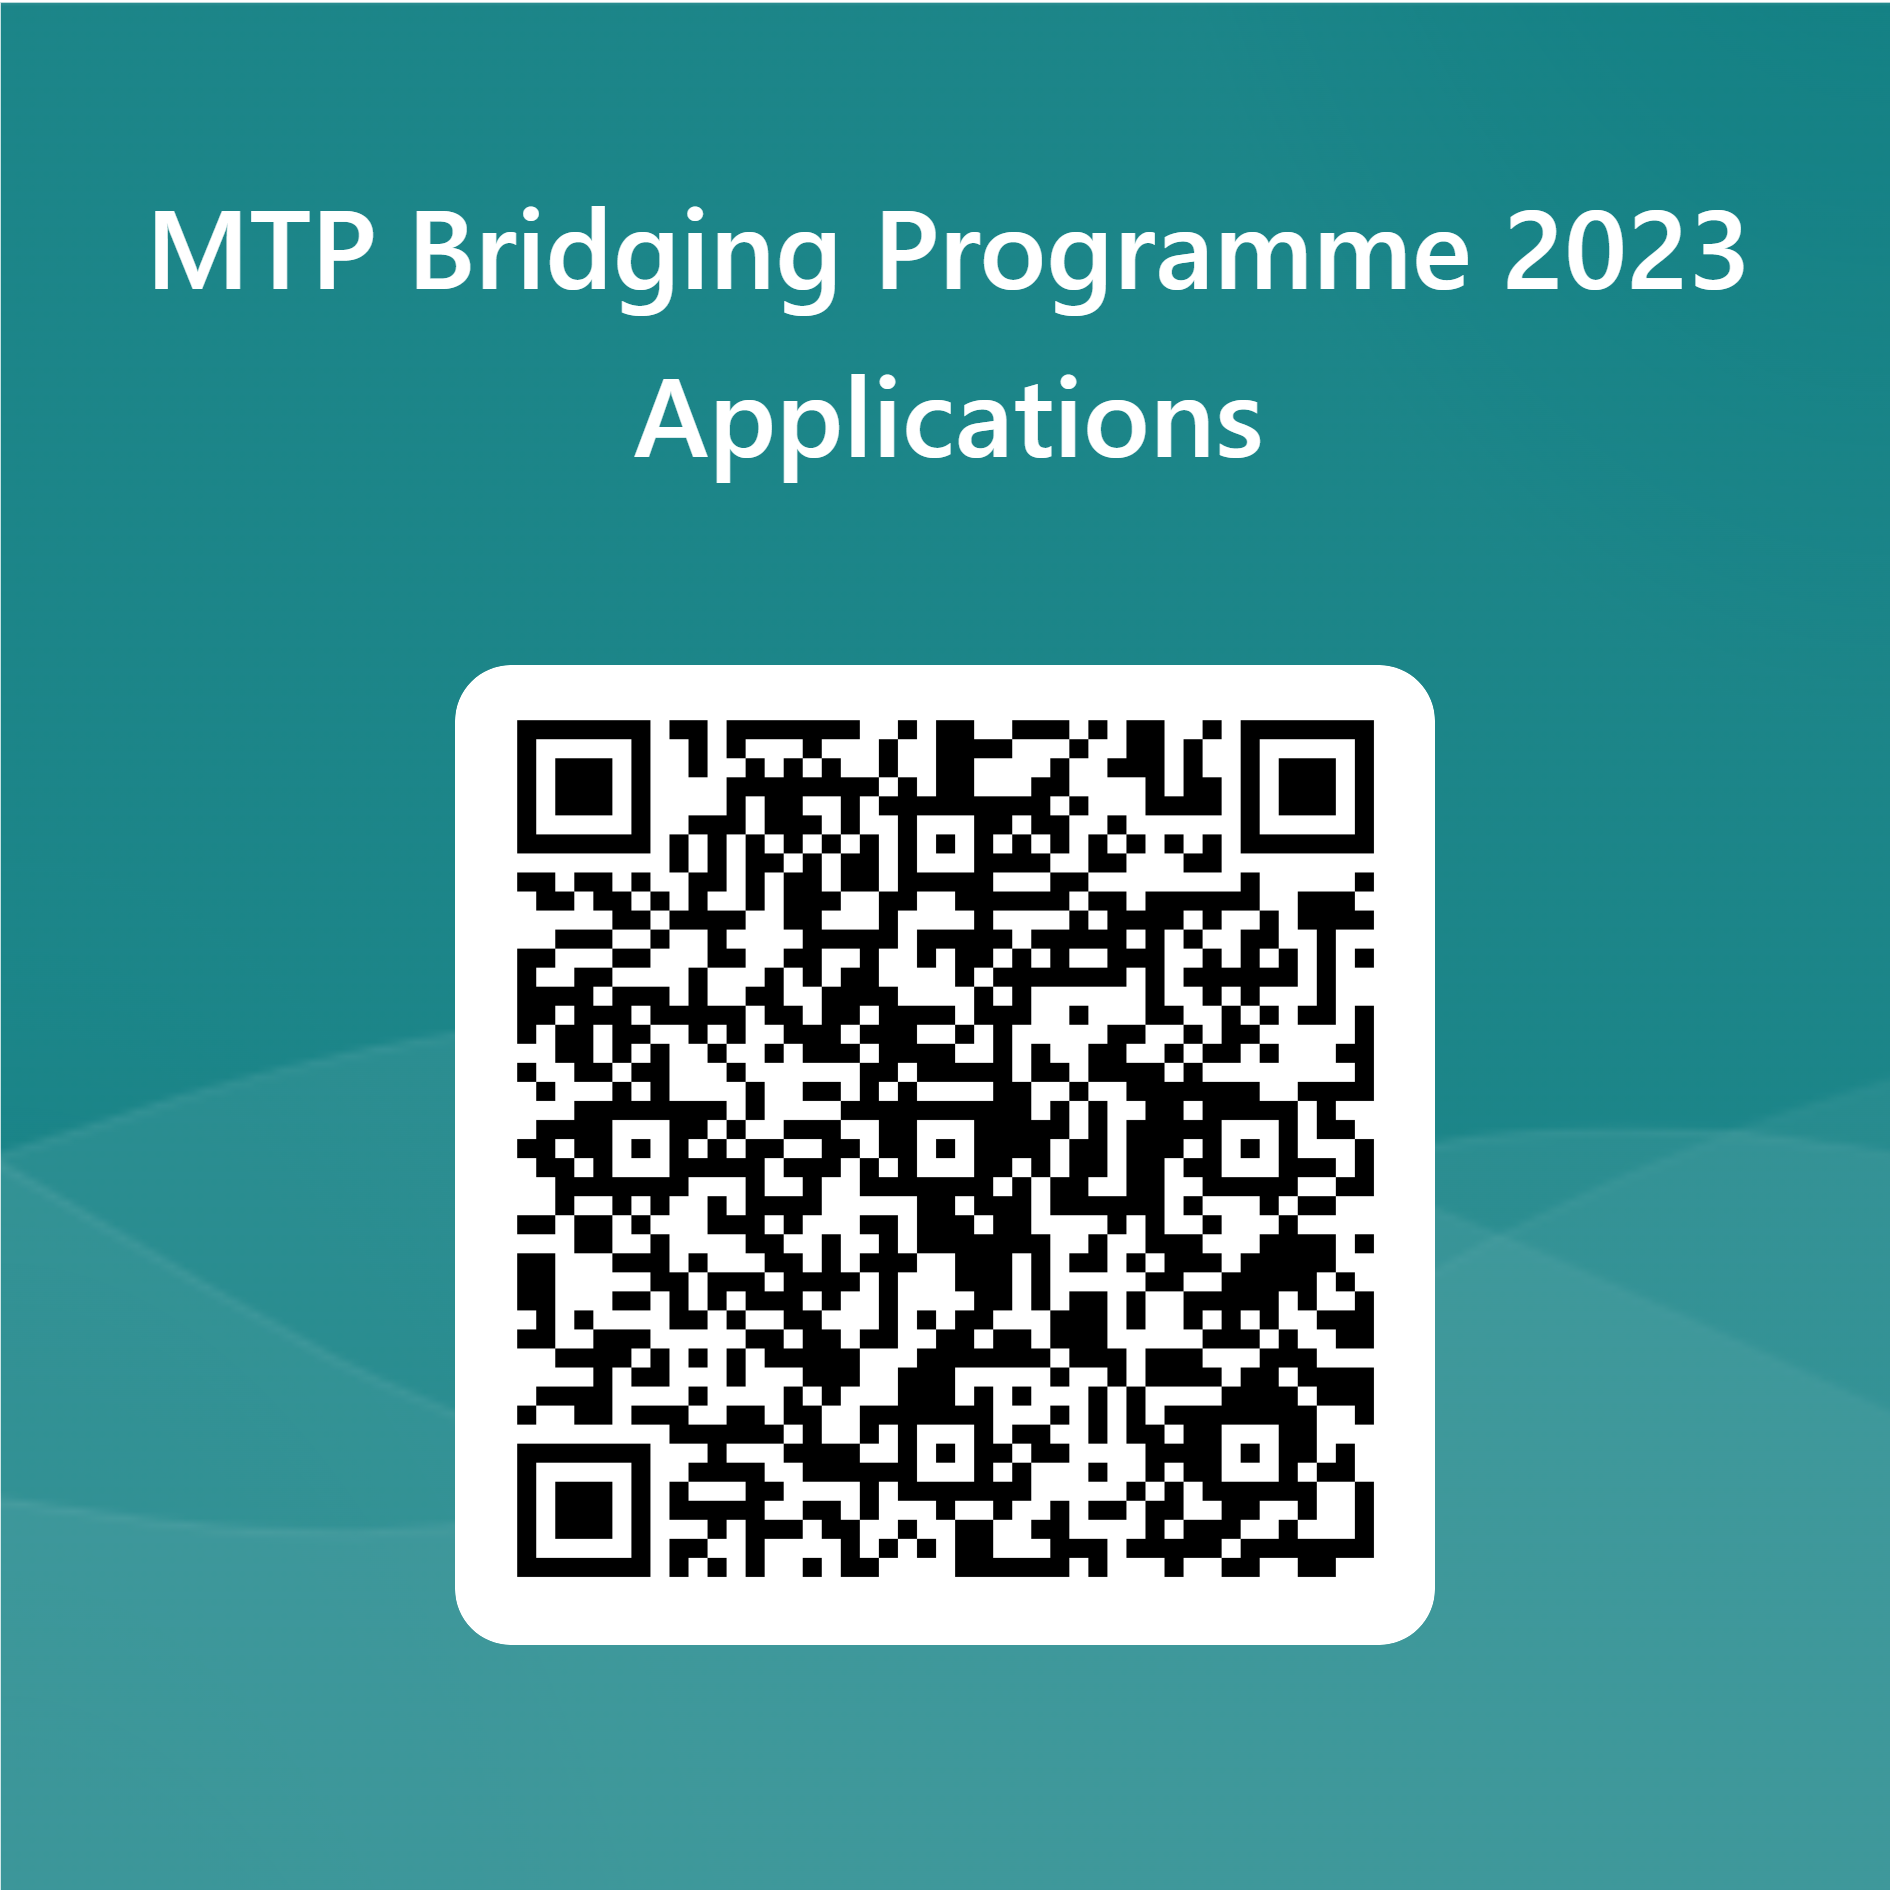 QRCode-for-MTP-Bridging-Programme-2023-Applications